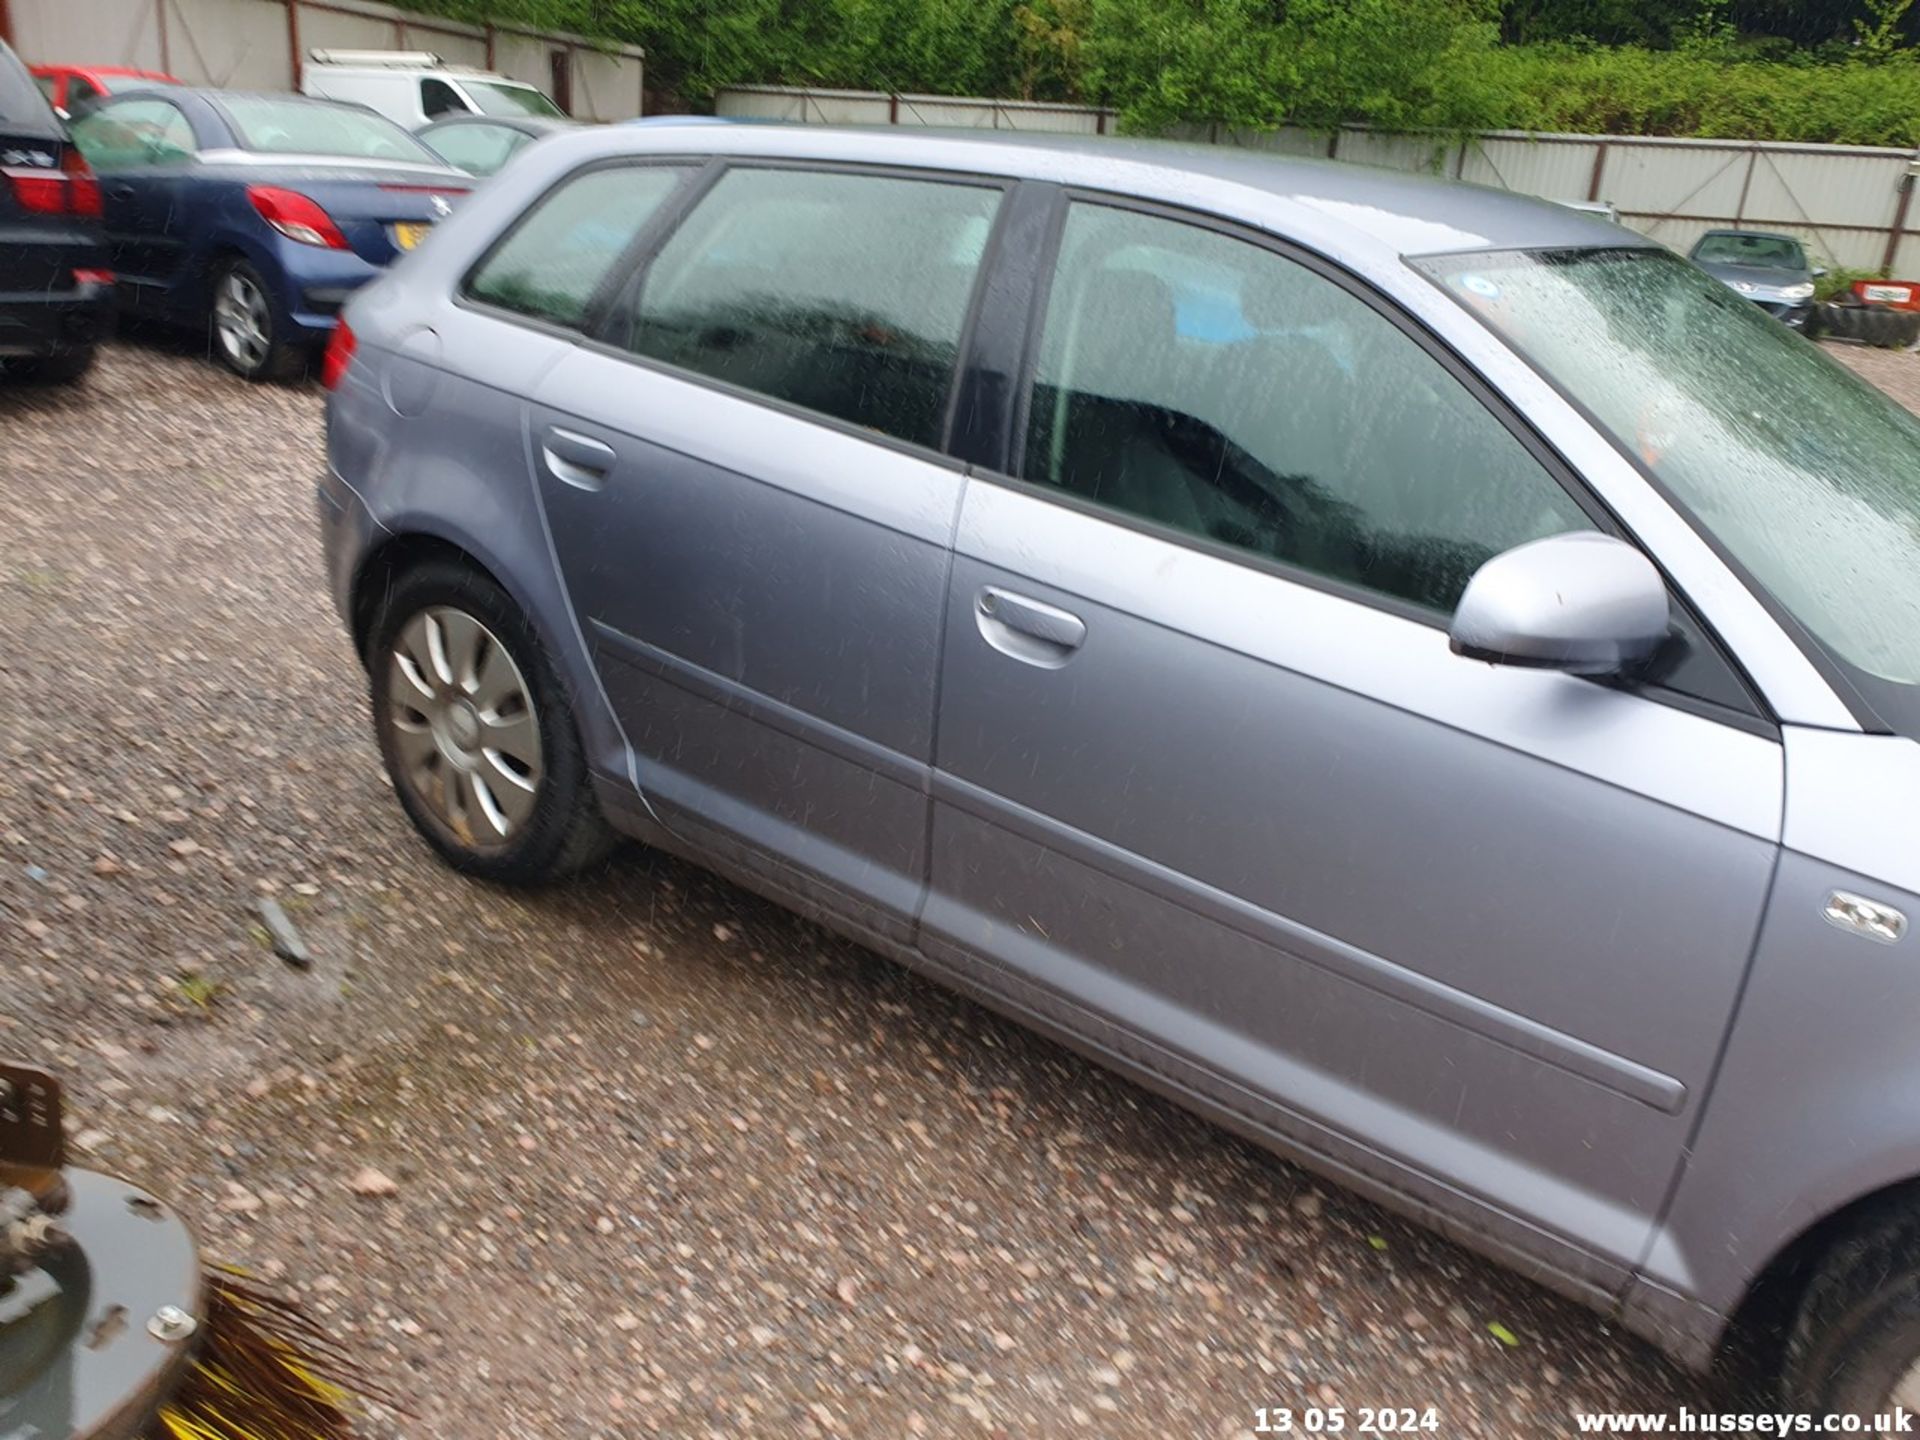 06/55 AUDI A3 SPECIAL EDITION - 1595cc 5dr Hatchback (Silver, 129k) - Image 13 of 38